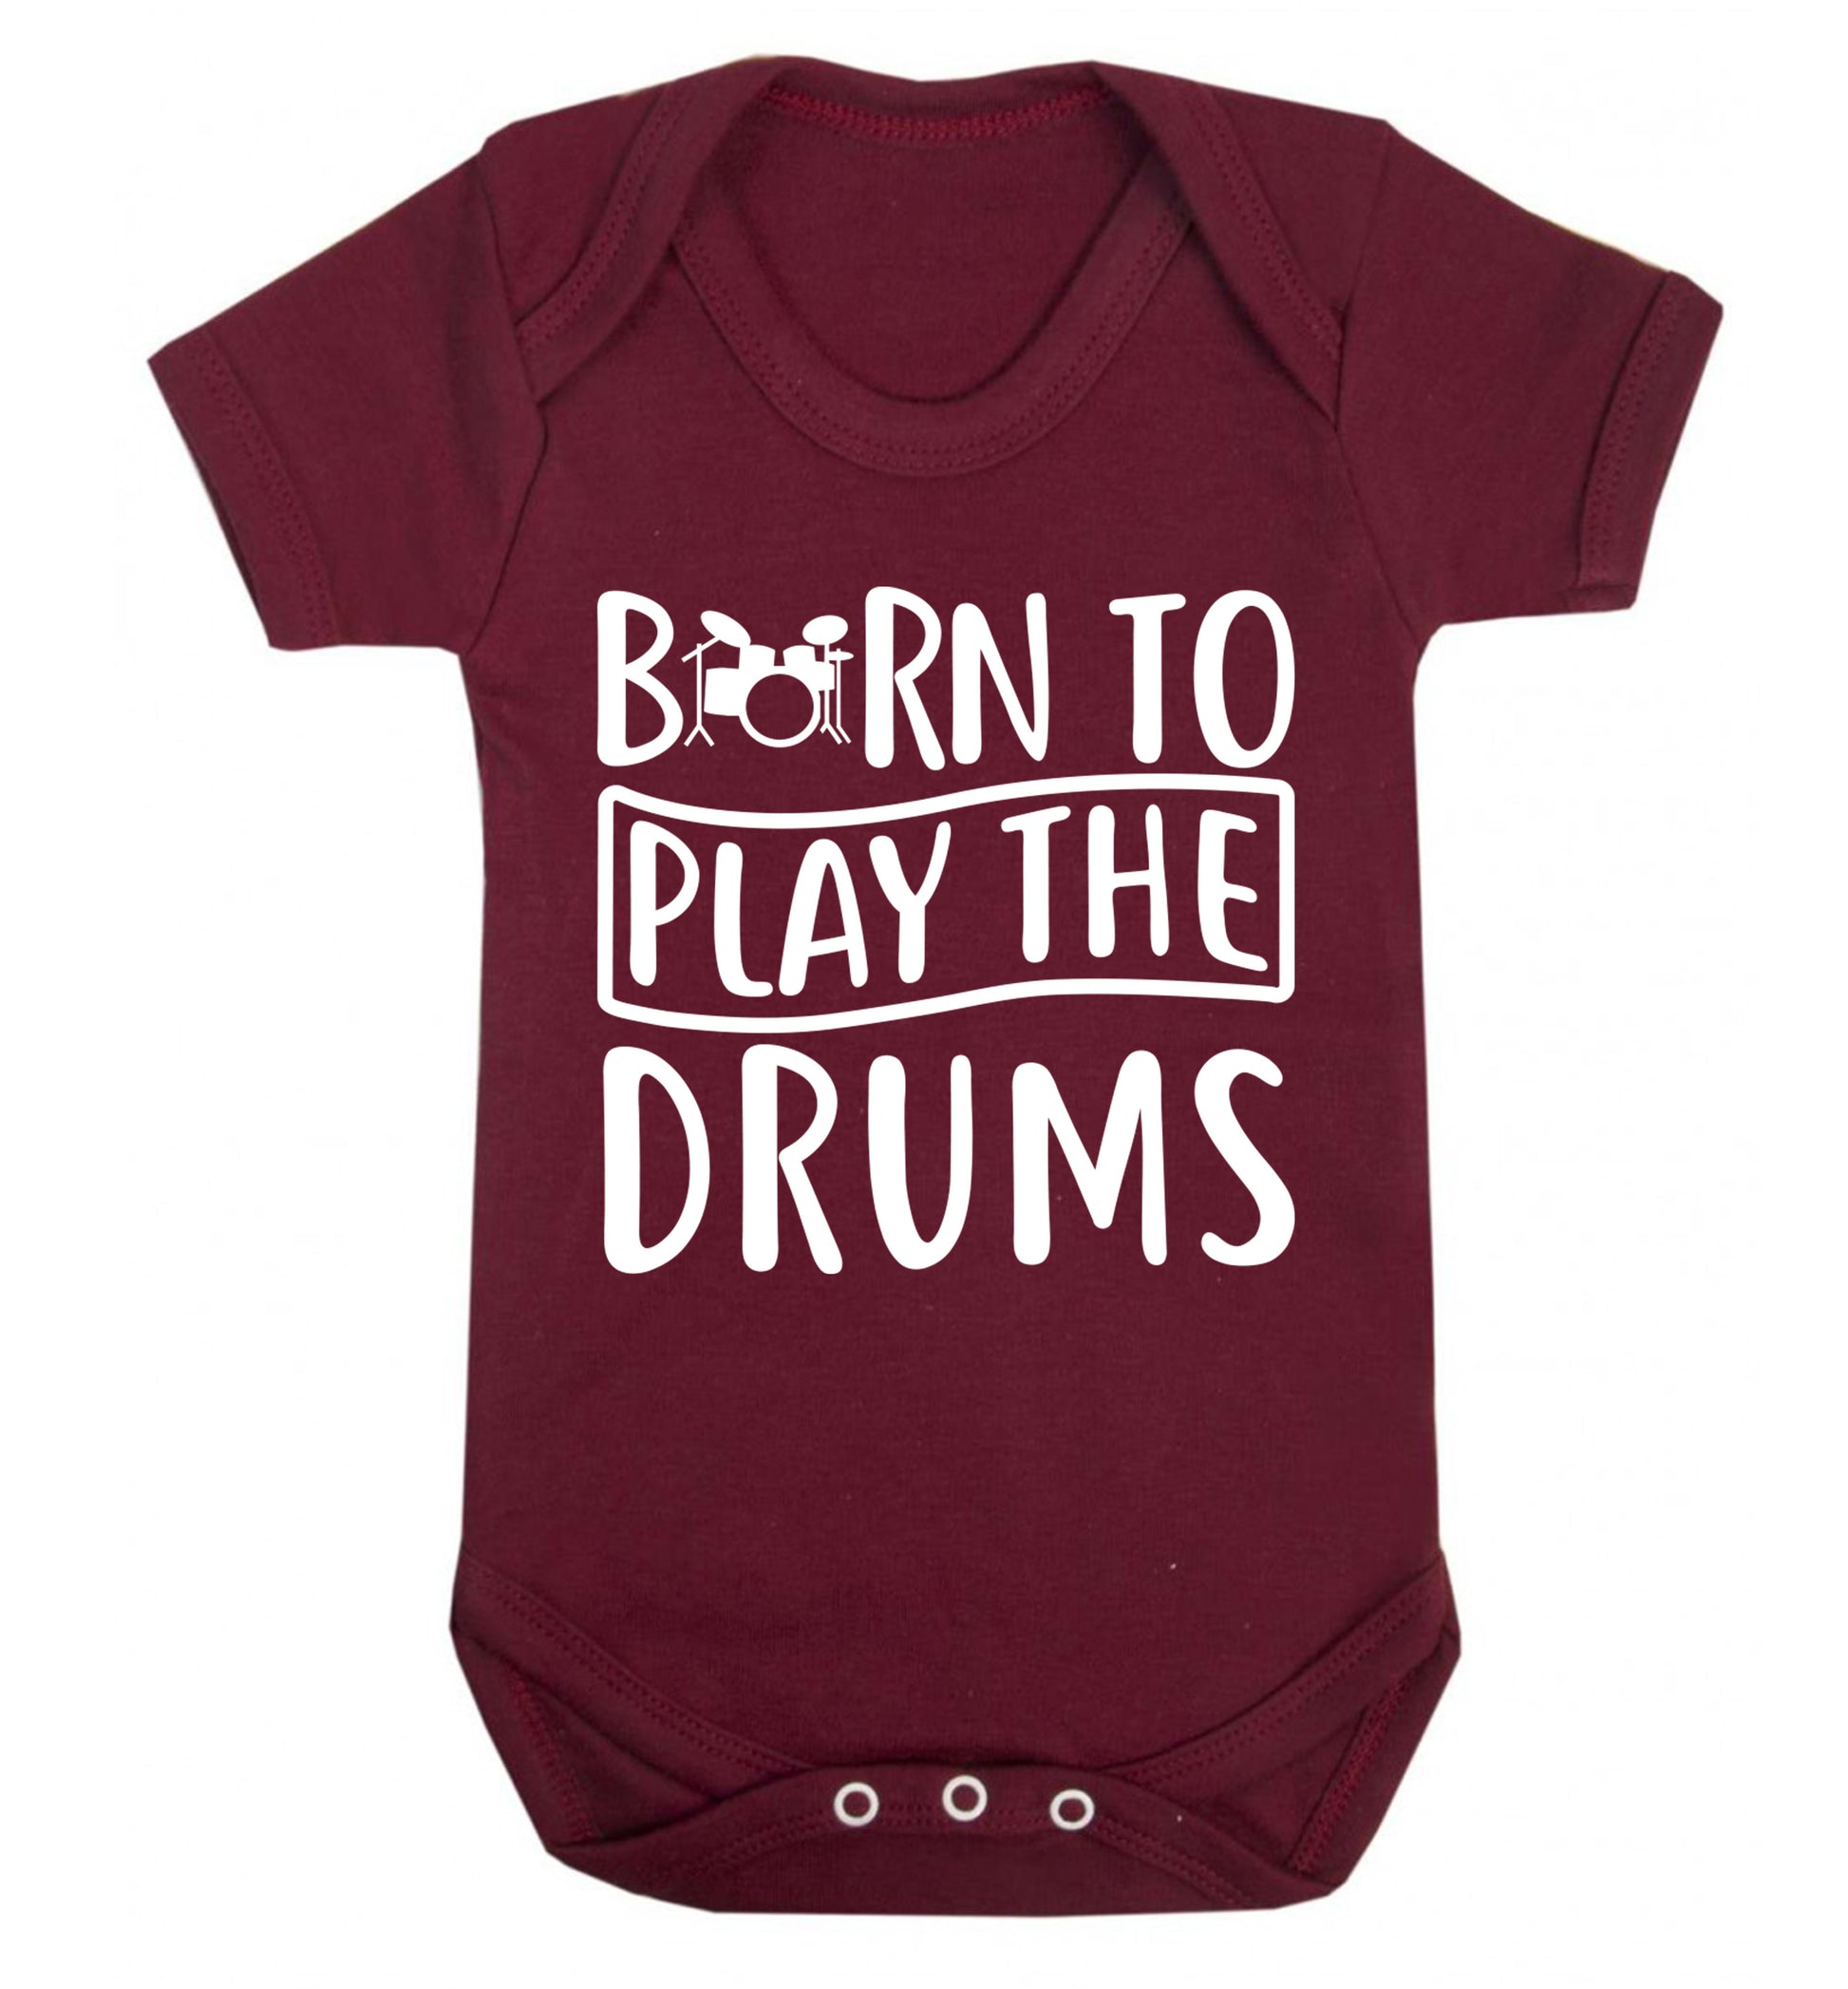 Born to play the drums Baby Vest maroon 18-24 months